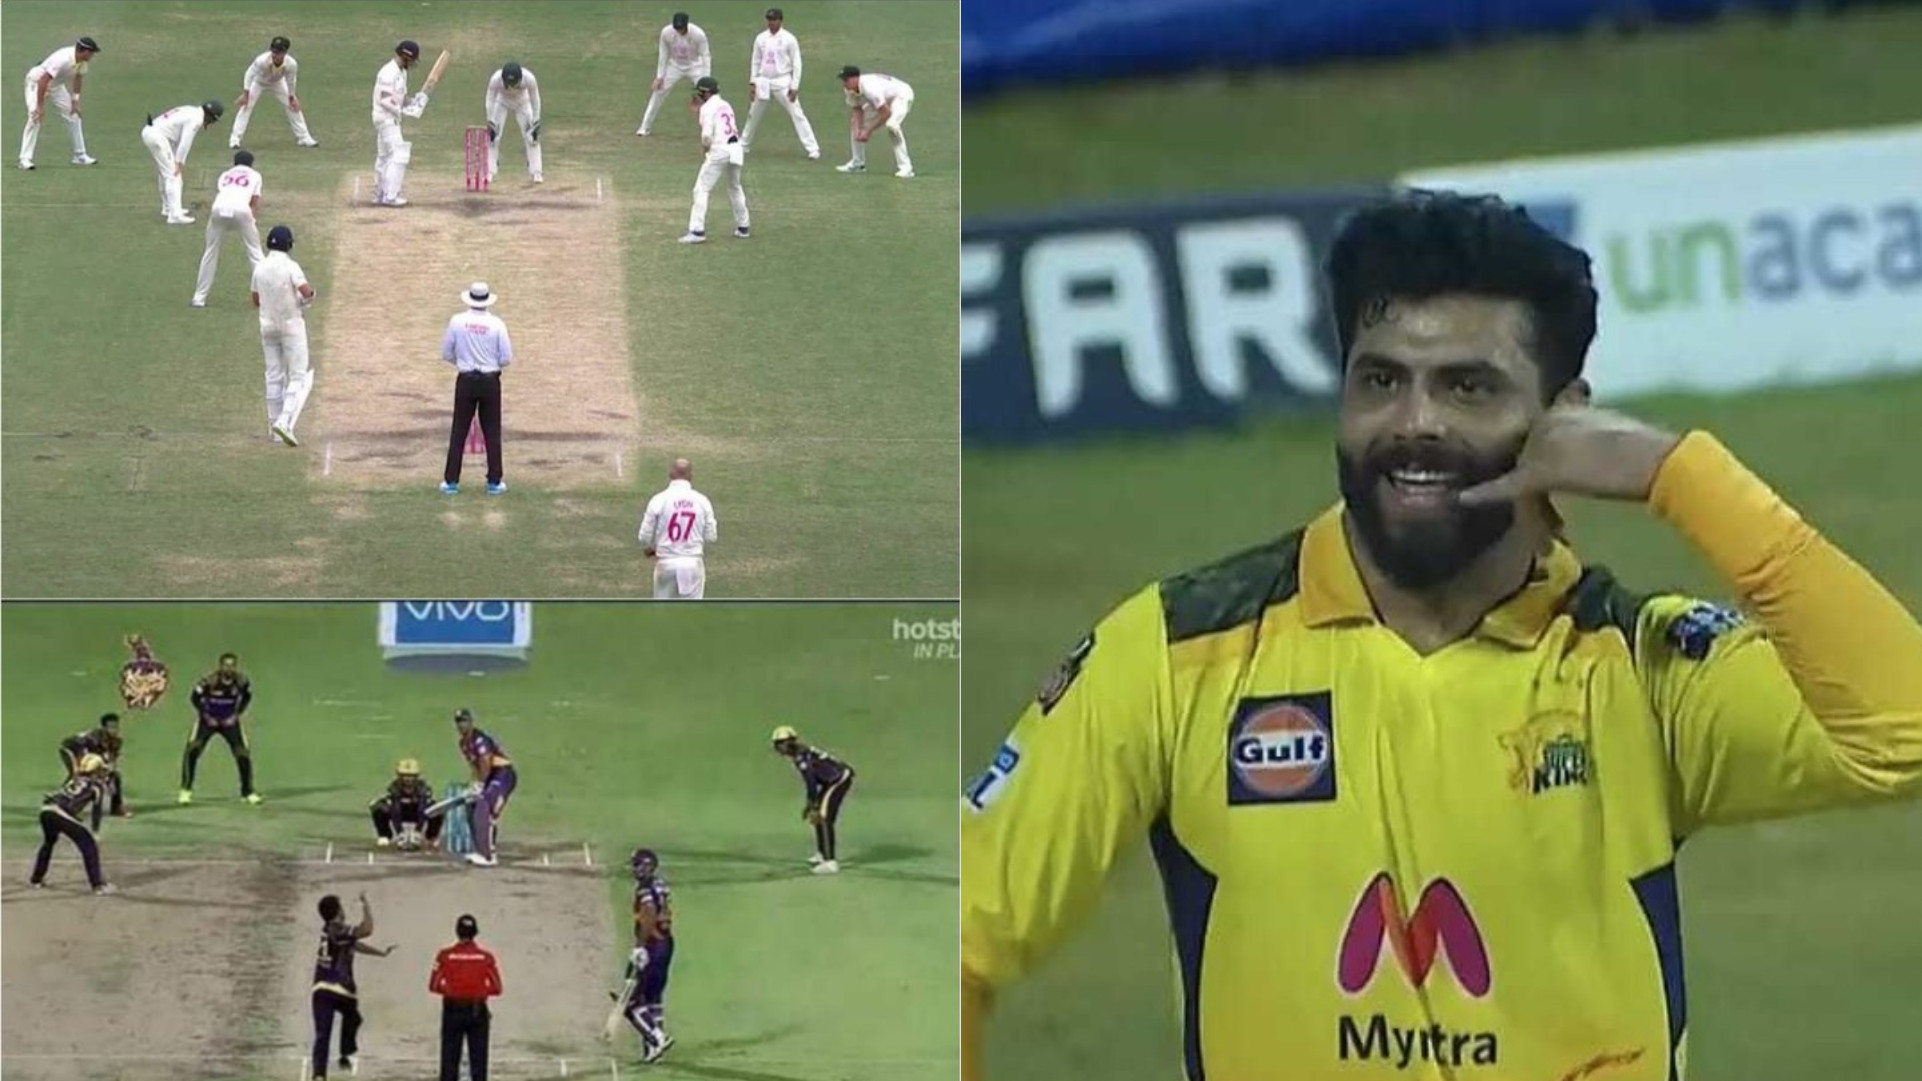 ‘Just a show-off’ - Ravindra Jadeja gives funny retort to KKR over their MS Dhoni post